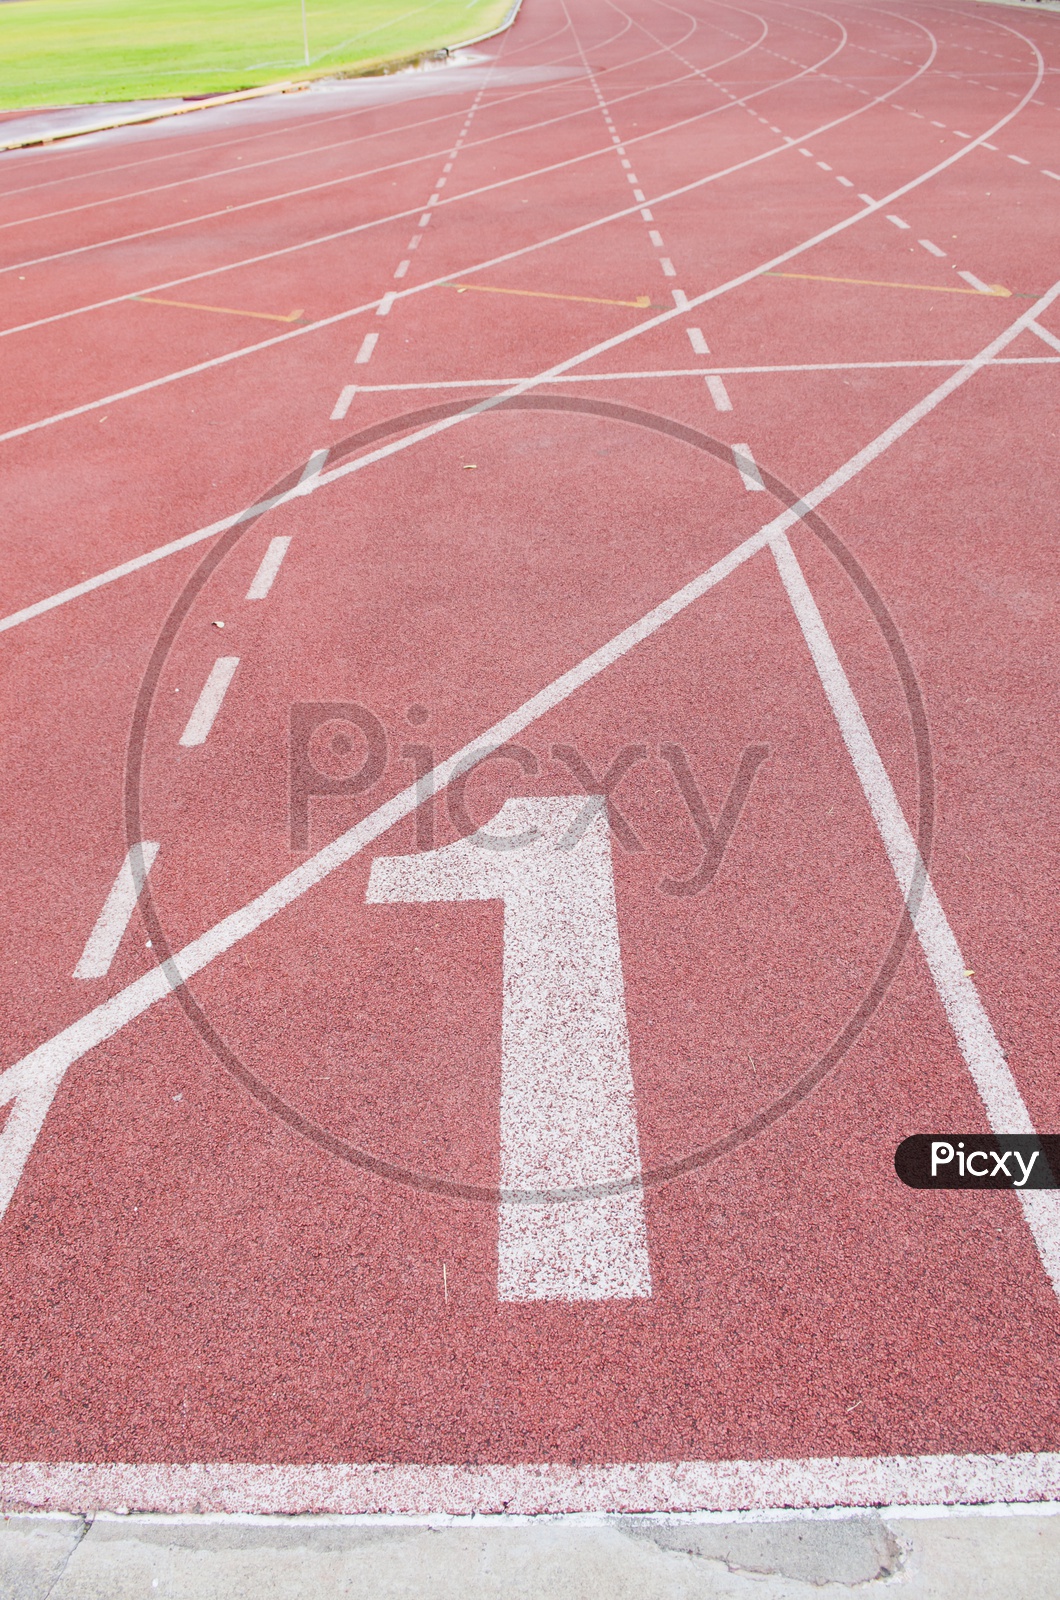 "1" Numbers on red running track At a Stadium